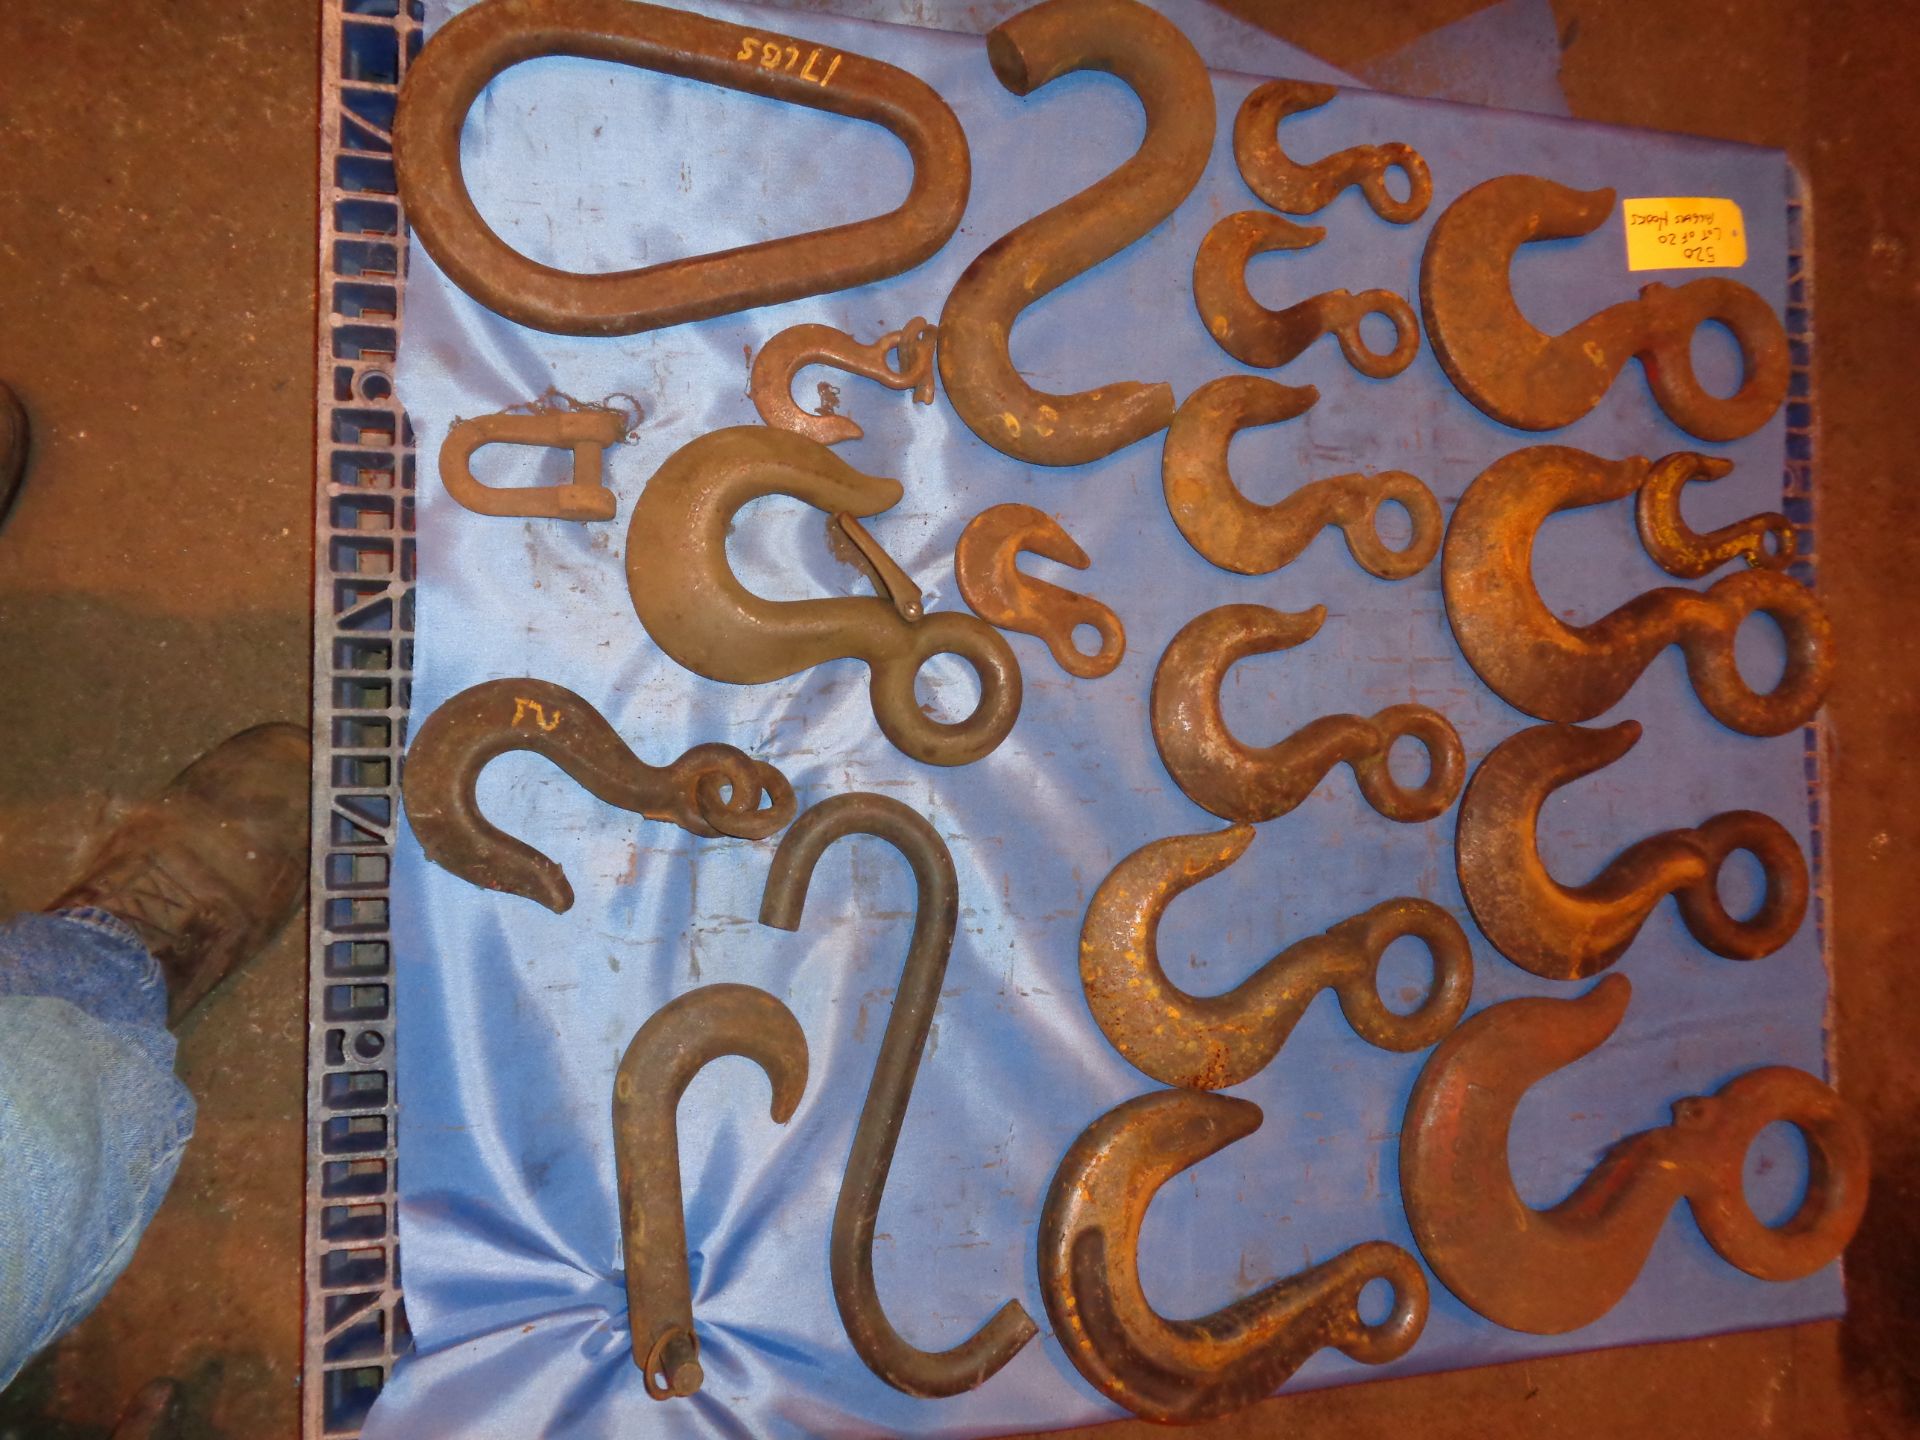 Lot of 20 Riggers Hooks (520) - Image 6 of 10